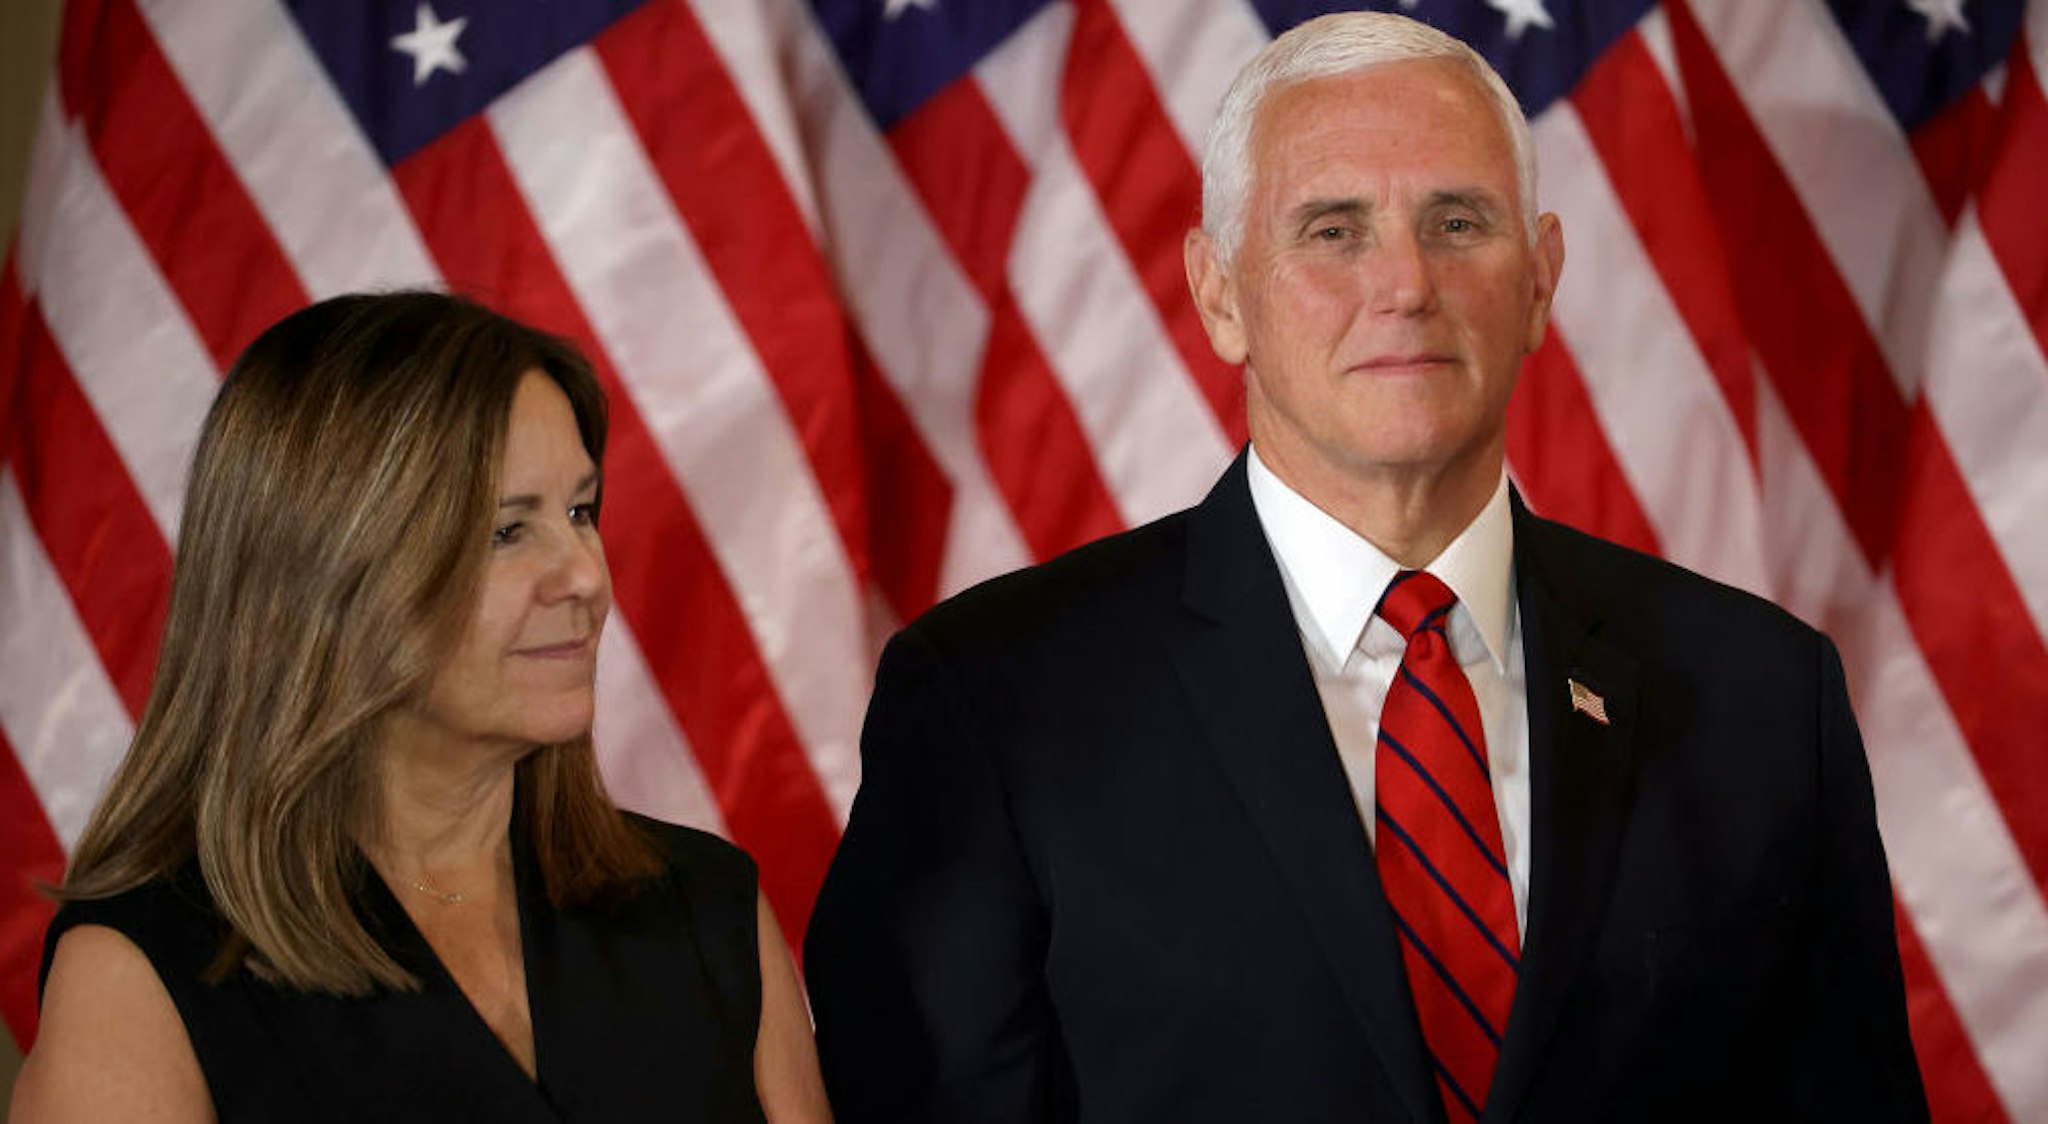 WASHINGTON, DC - NOVEMBER 04: Vice President Mike Pence and Karen Pence look on as U.S. President Donald Trump speaks on election night in the East Room of the White House in the early morning hours of November 04, 2020 in Washington, DC. Trump spoke shortly after 2am with the presidential race against Democratic presidential nominee Joe Biden still too close to call.